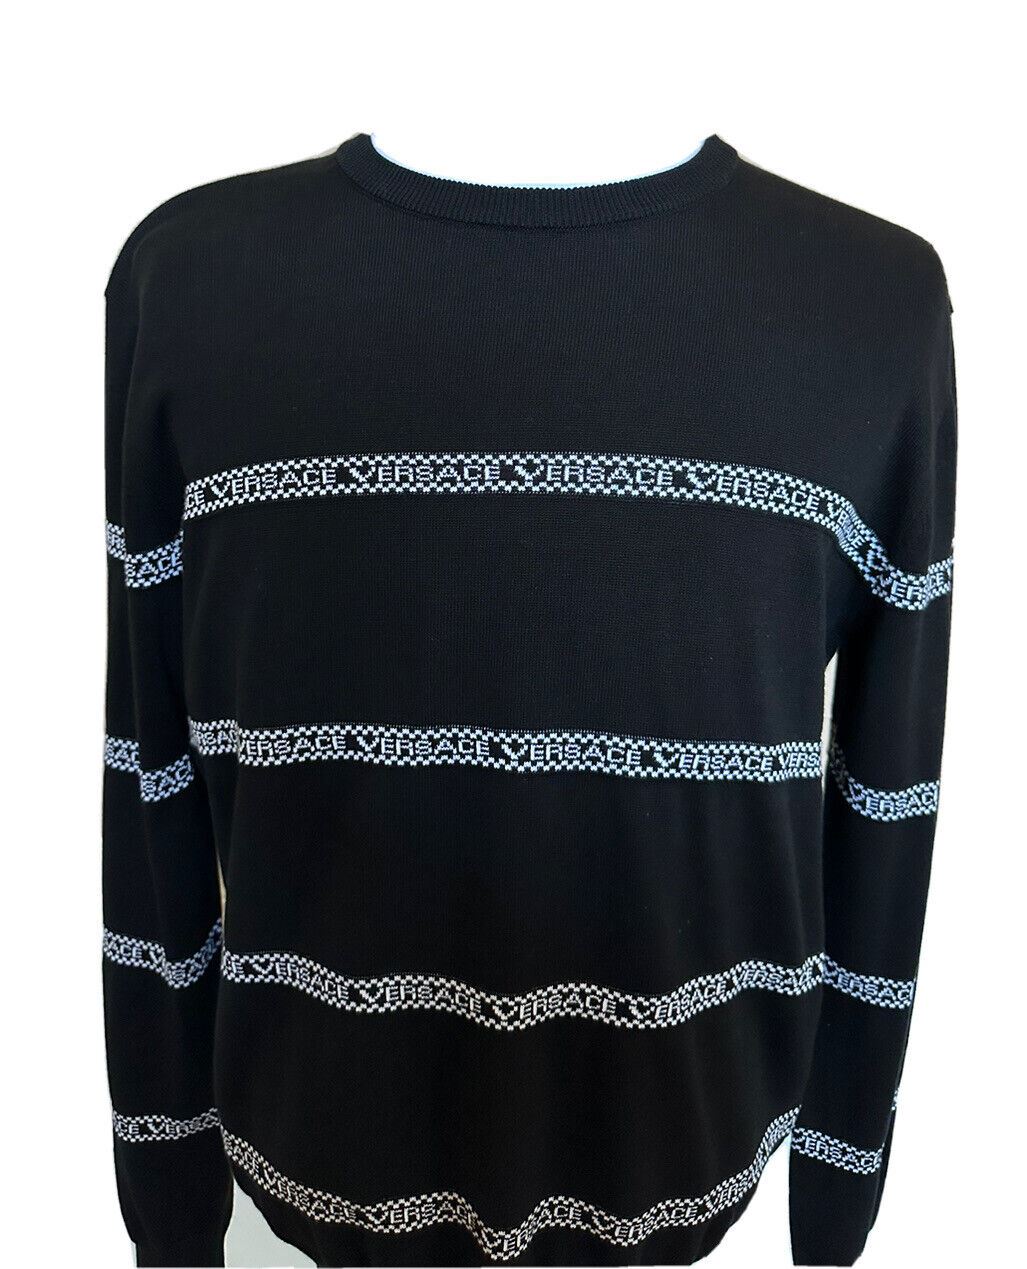 NWT $850 Versace Logo Cotton Knit Sweater Black 54 (2XL) Italy A89468S